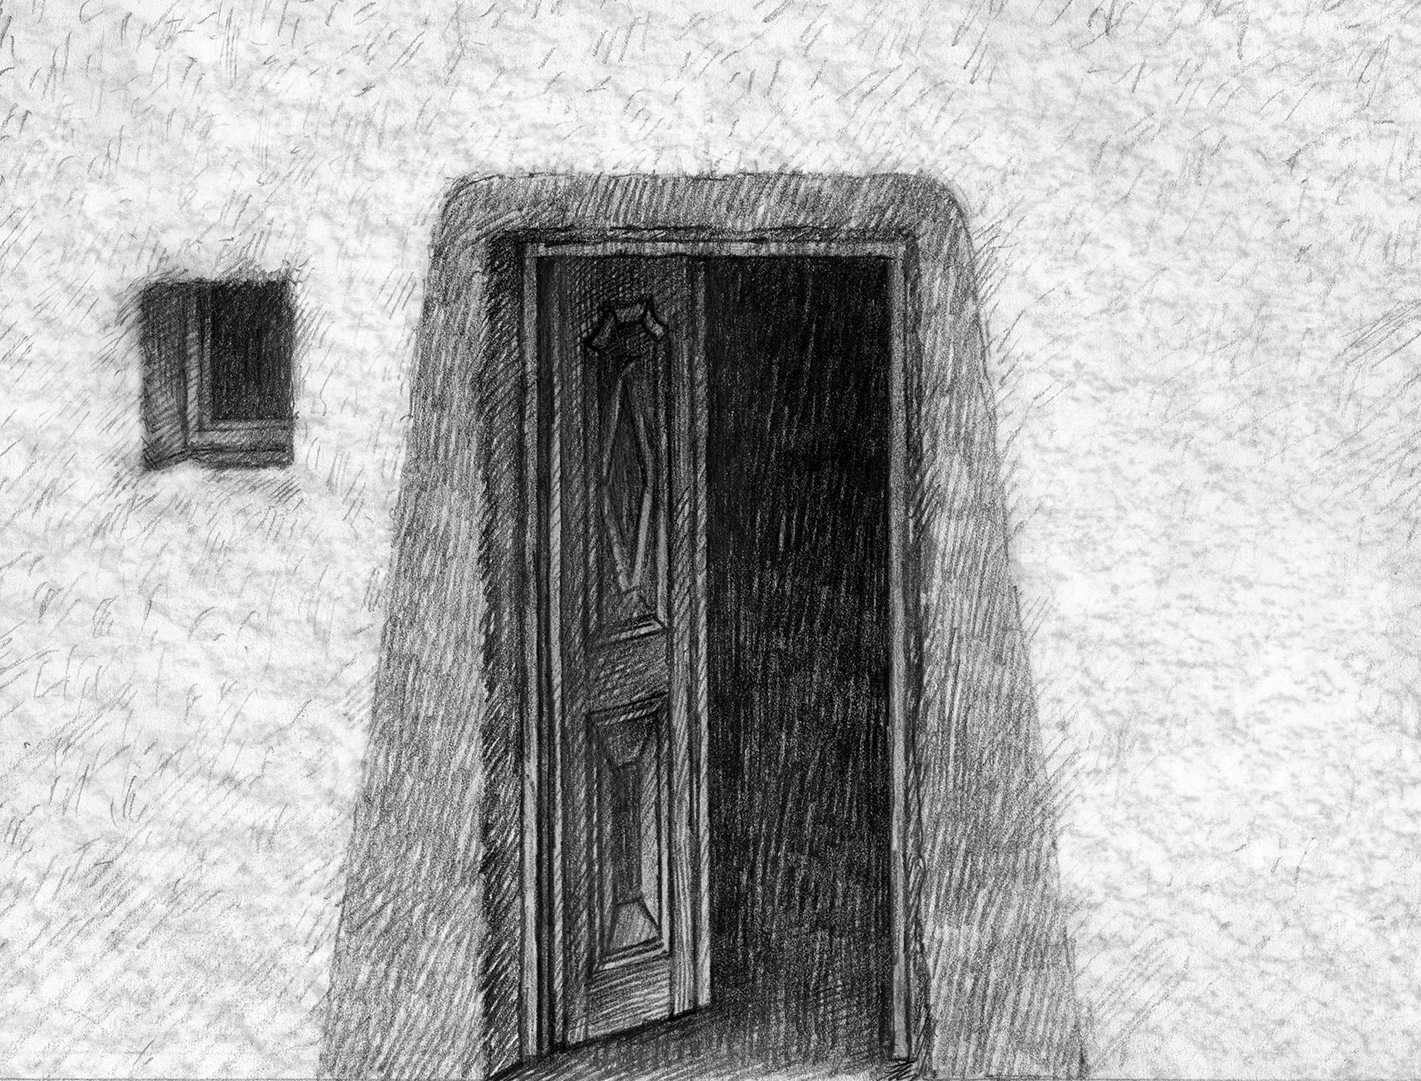 ‘Kaf El Amar’ – Film, Egypt  2011.

Doorway of main character’s house – scanned pencil drawing with textures added
in Photoshop.